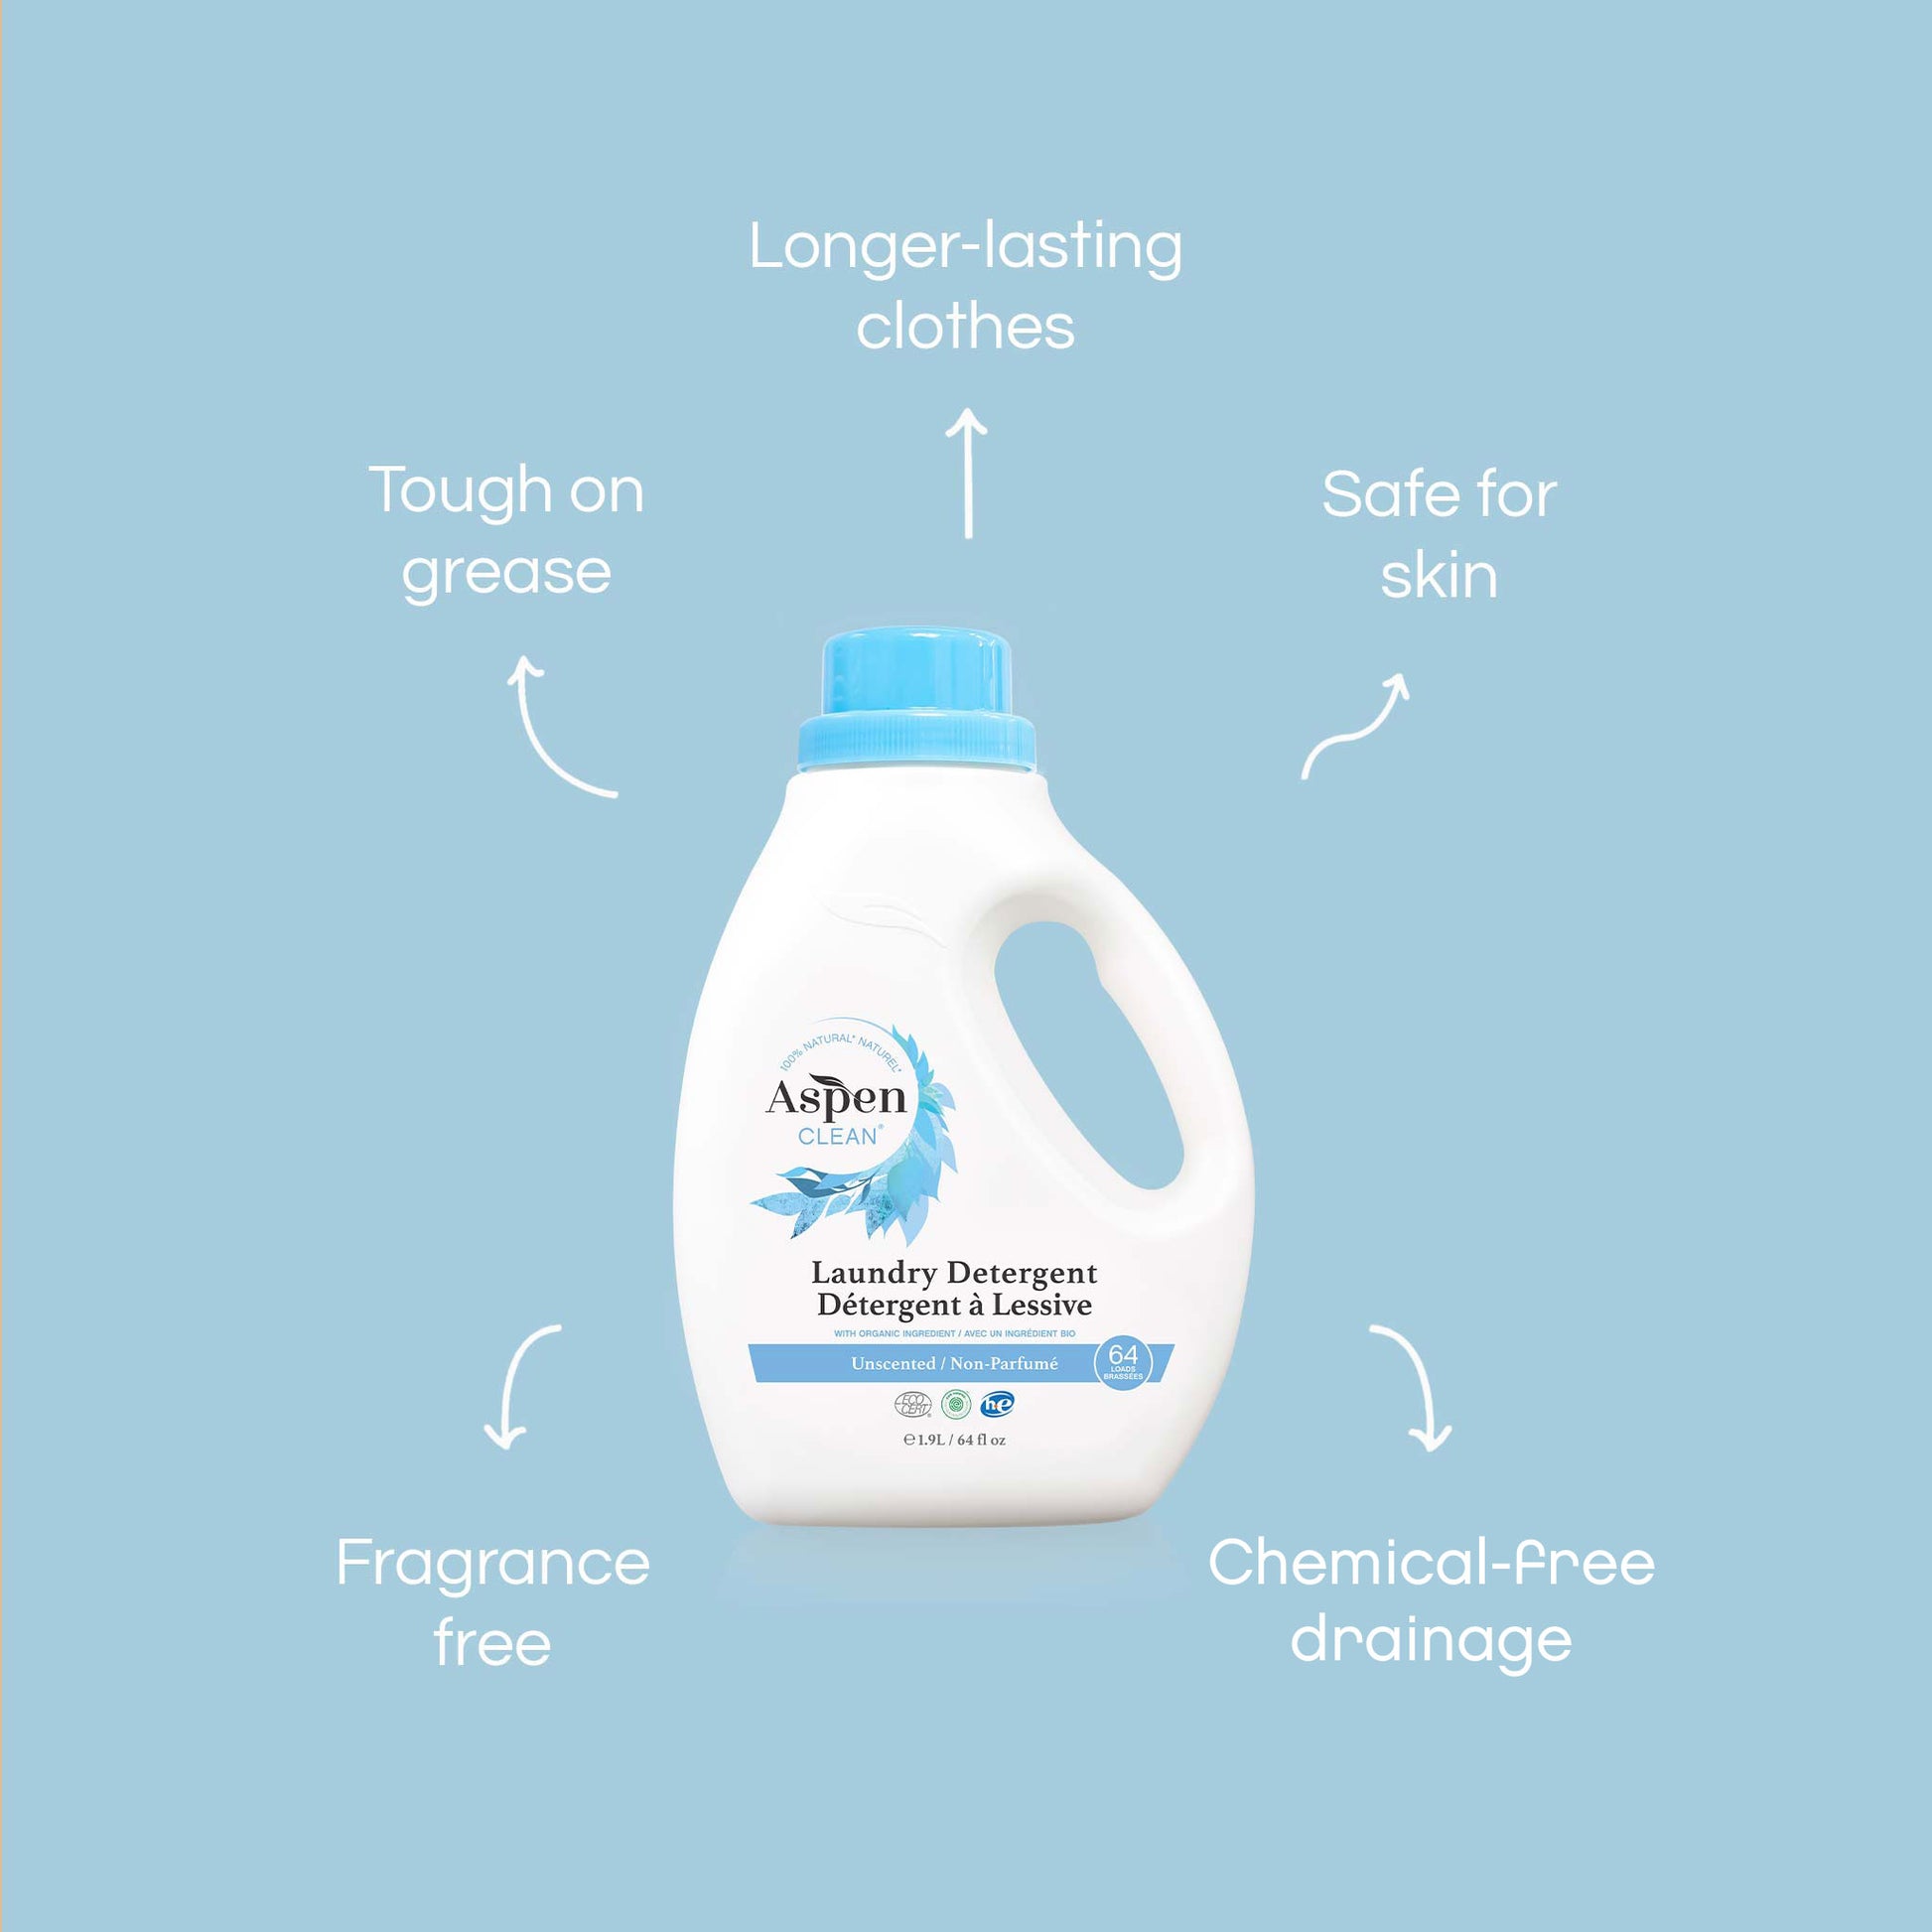 Natural Laundry Detergent Unscented features